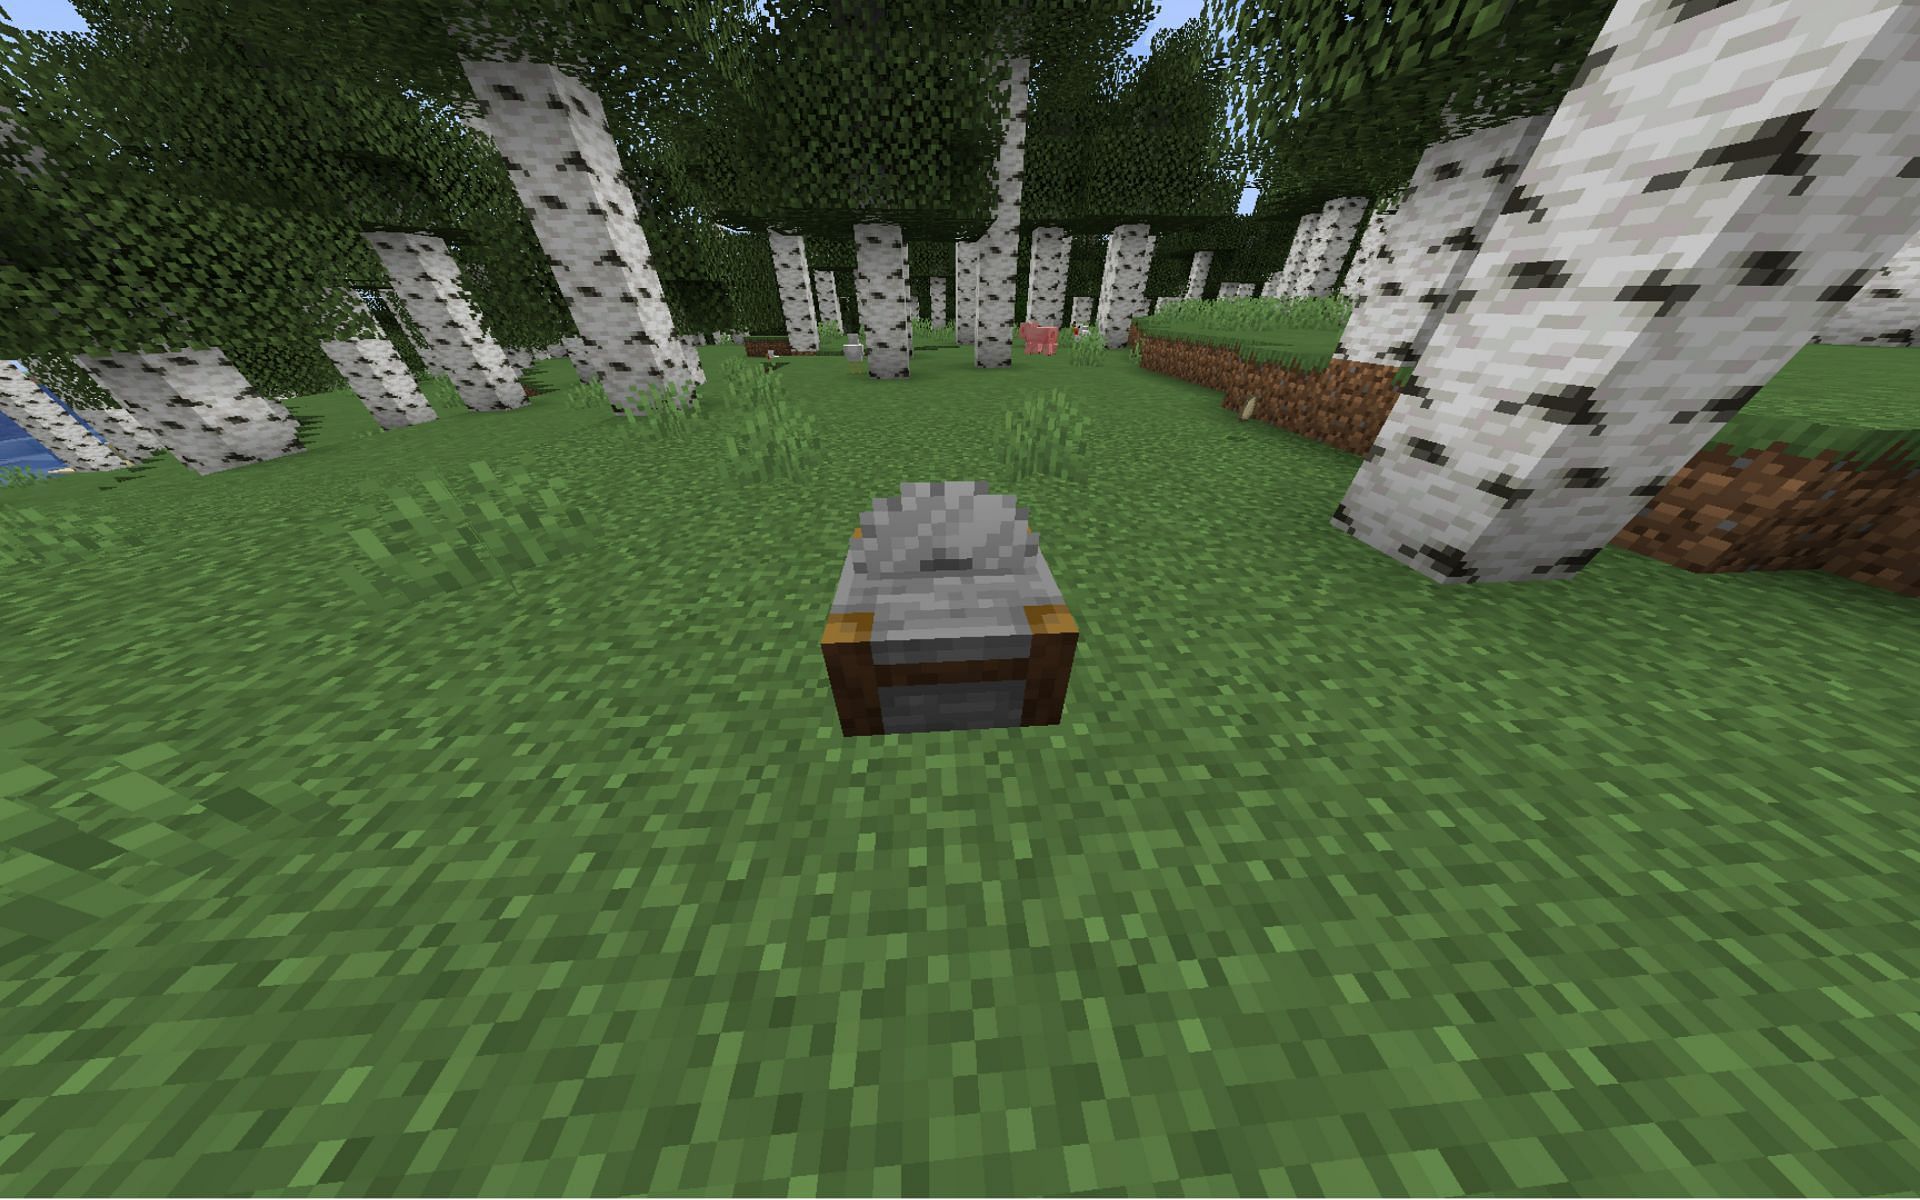 Stonecutters are handy blocks in the game (Image via Minecraft)